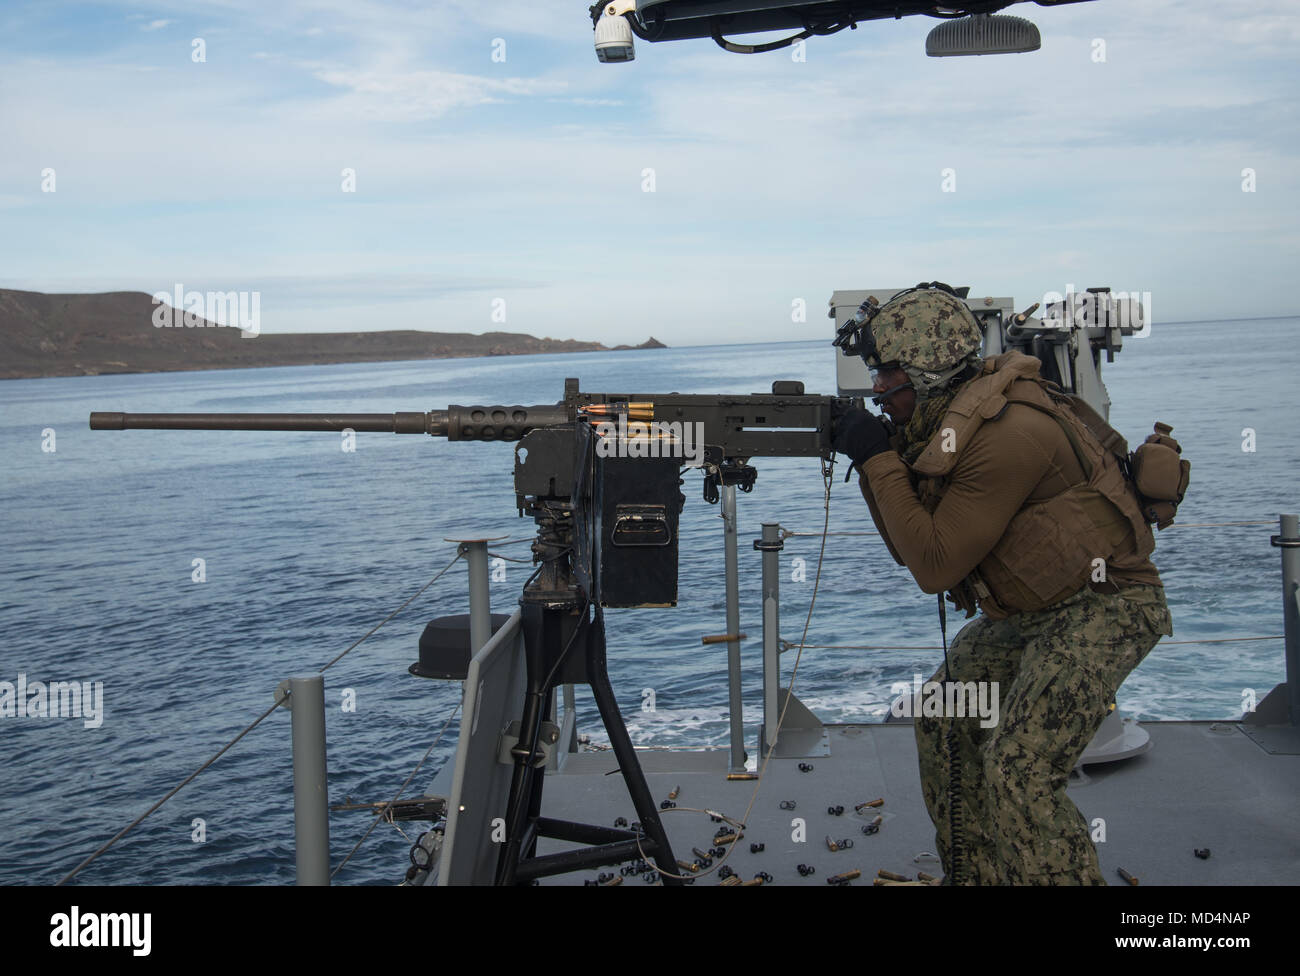 180321-N-NT795-304 SAN CLEMENTE ISLAND, Calif. (March 21, 2018) Boatswain’s Mate 2nd Class Ralphaell Punch, a native of Mount Union, Philadelphia assigned to Coastal Riverine Squadron (CRS) 3, fires a .50-caliber machine gun aboard MKVI patrol boat during a live fire exercise as part of unit level training provided by Coastal Riverine Group (CRG) 1 Training and Evaluation Unit. CRG provides a core capability to defend designated high value assets throughout the green and blue-water environment and providing deployable Adaptive Force Packages (AFP) worldwide in an integrated, joint and combined Stock Photo